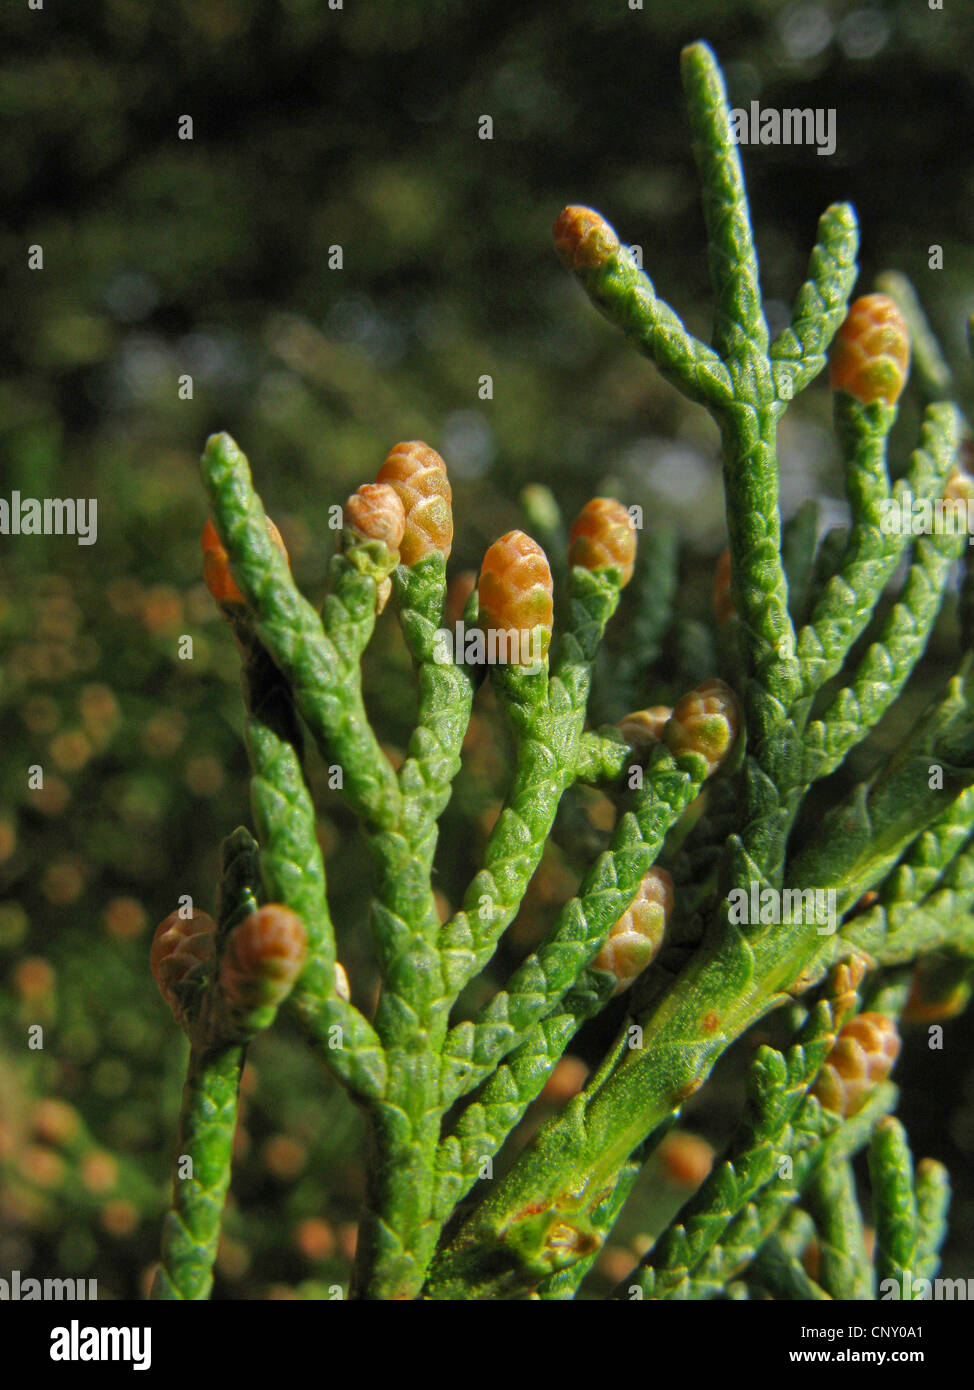 Italian cypress (Cupressus sempervirens), branch with male flowers Stock Photo